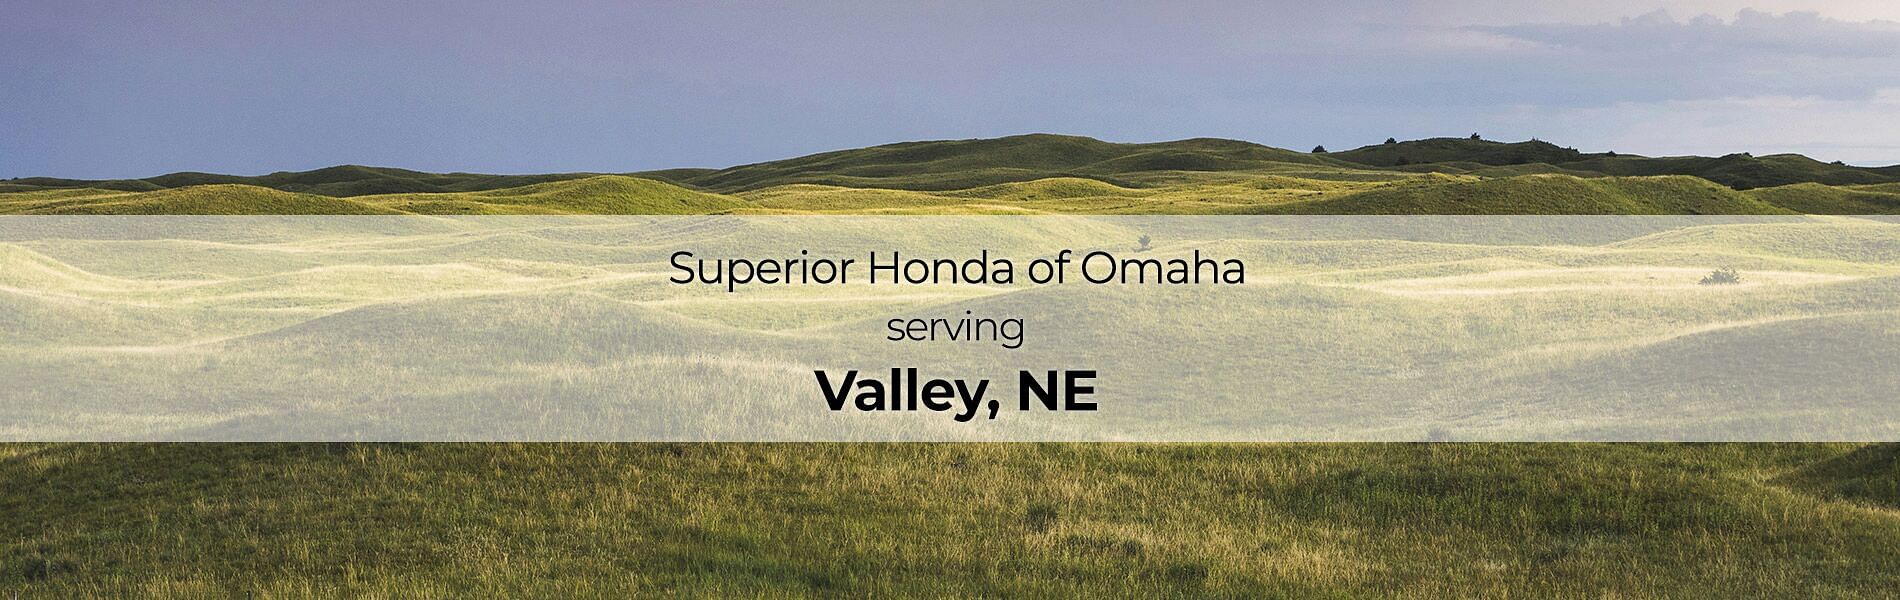 Green hills in background with text on front Superior Honda of Omaha serving Valley, NE